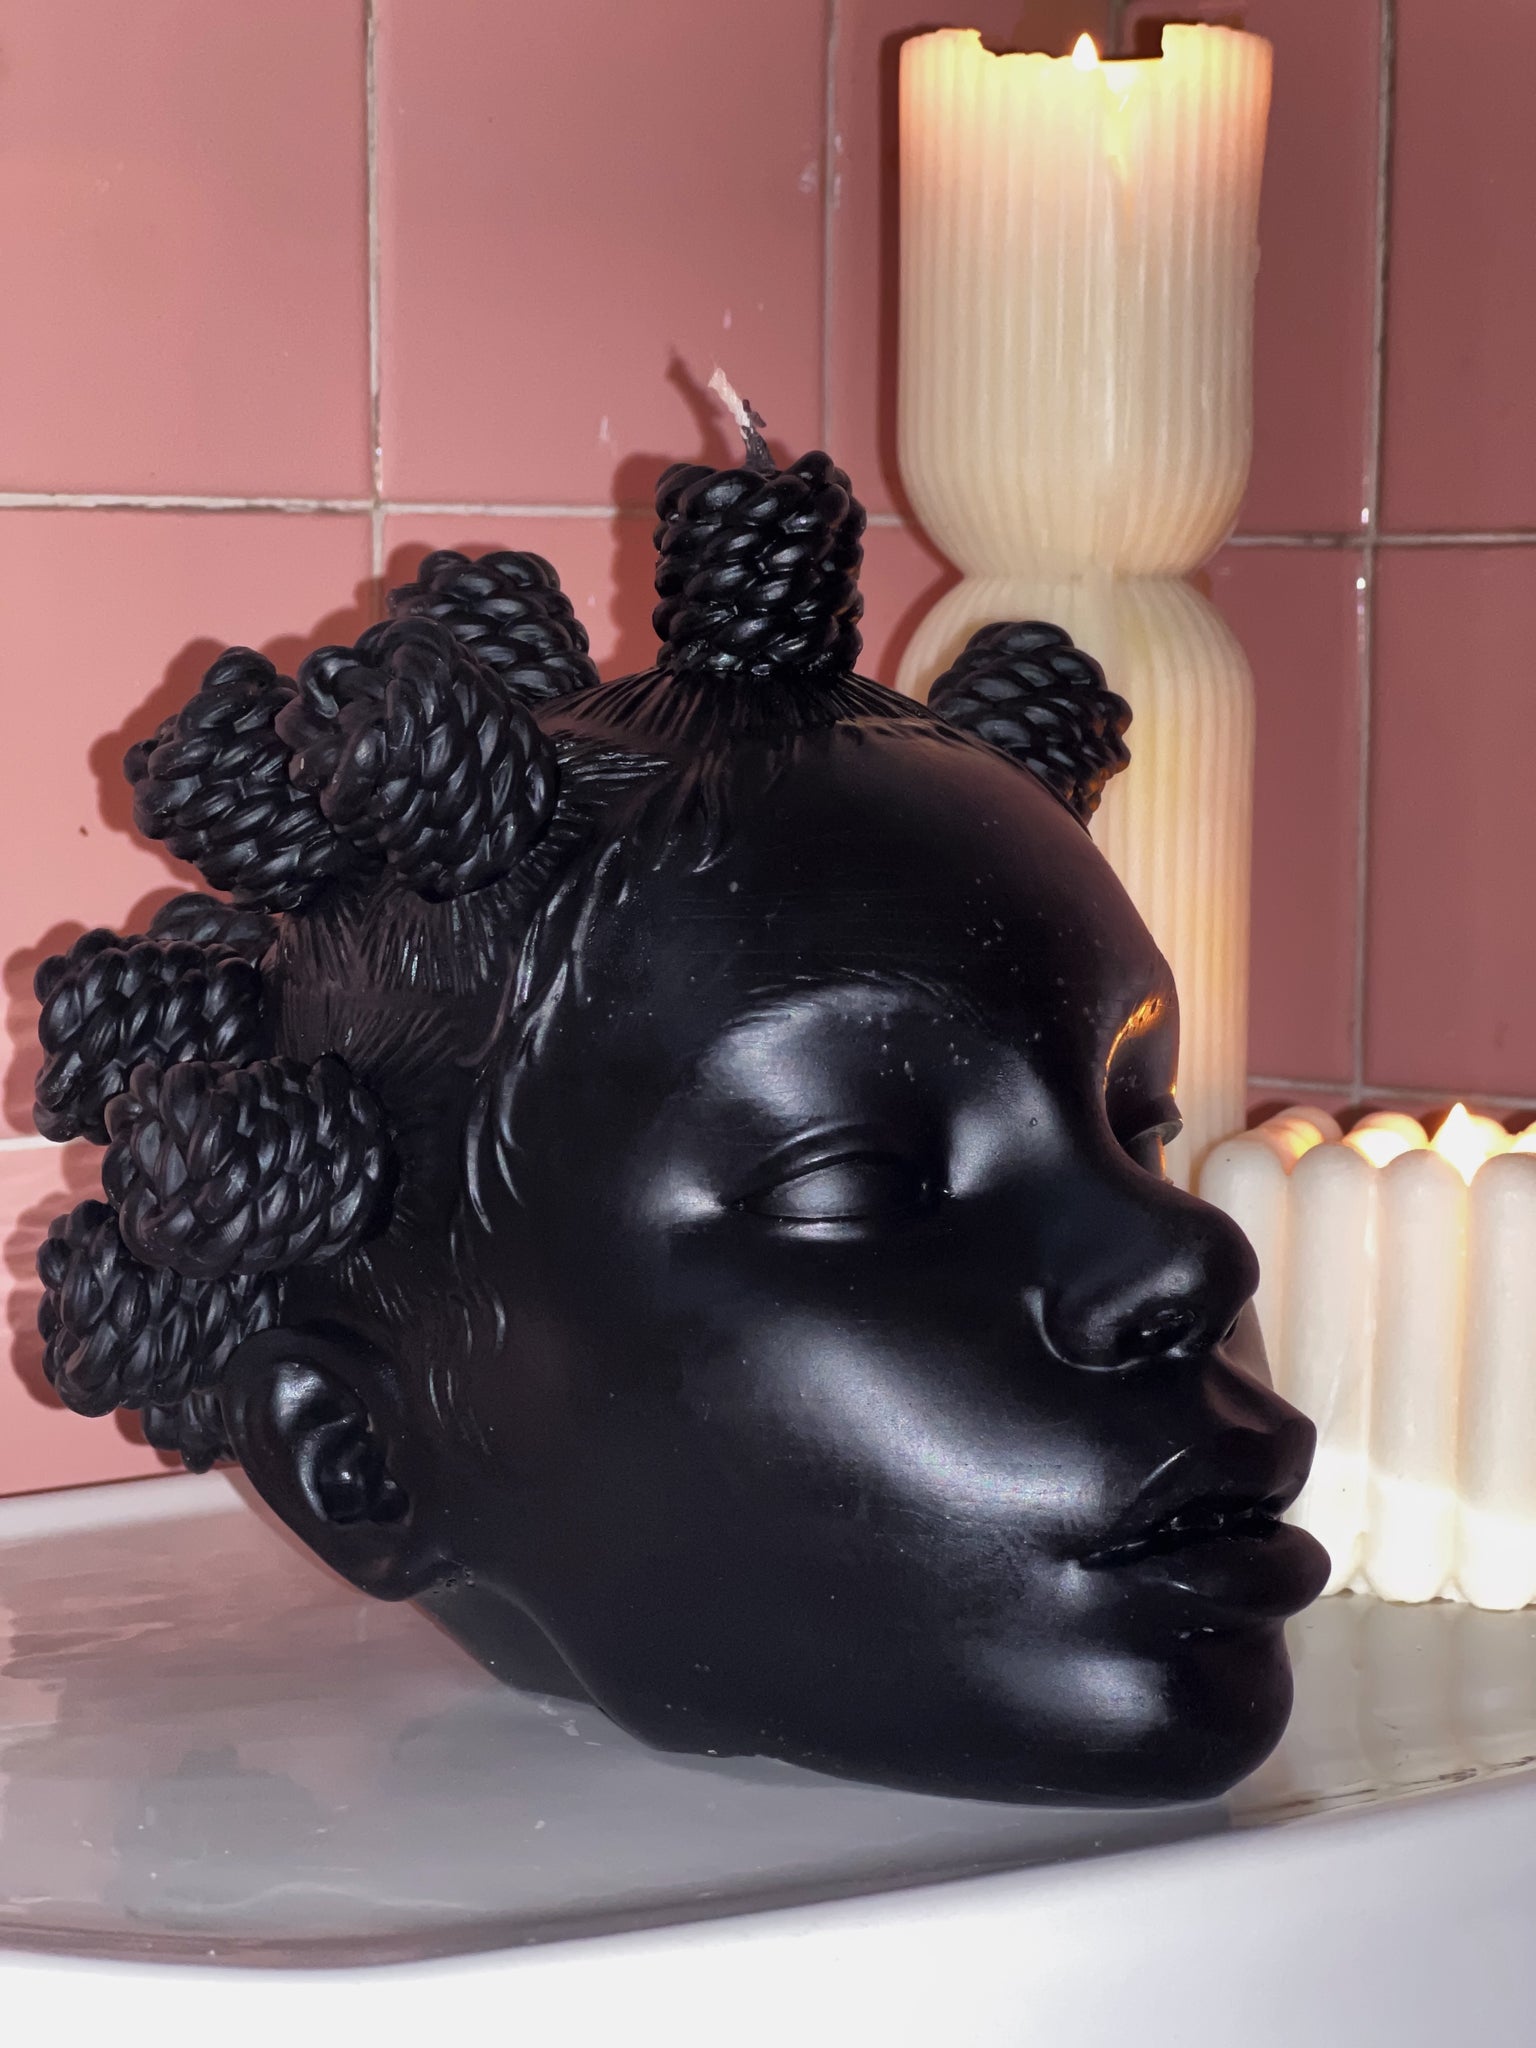 Crown Glory Bantu Knot Candle in Caviar (removable knots) - Secret Scents of Ella